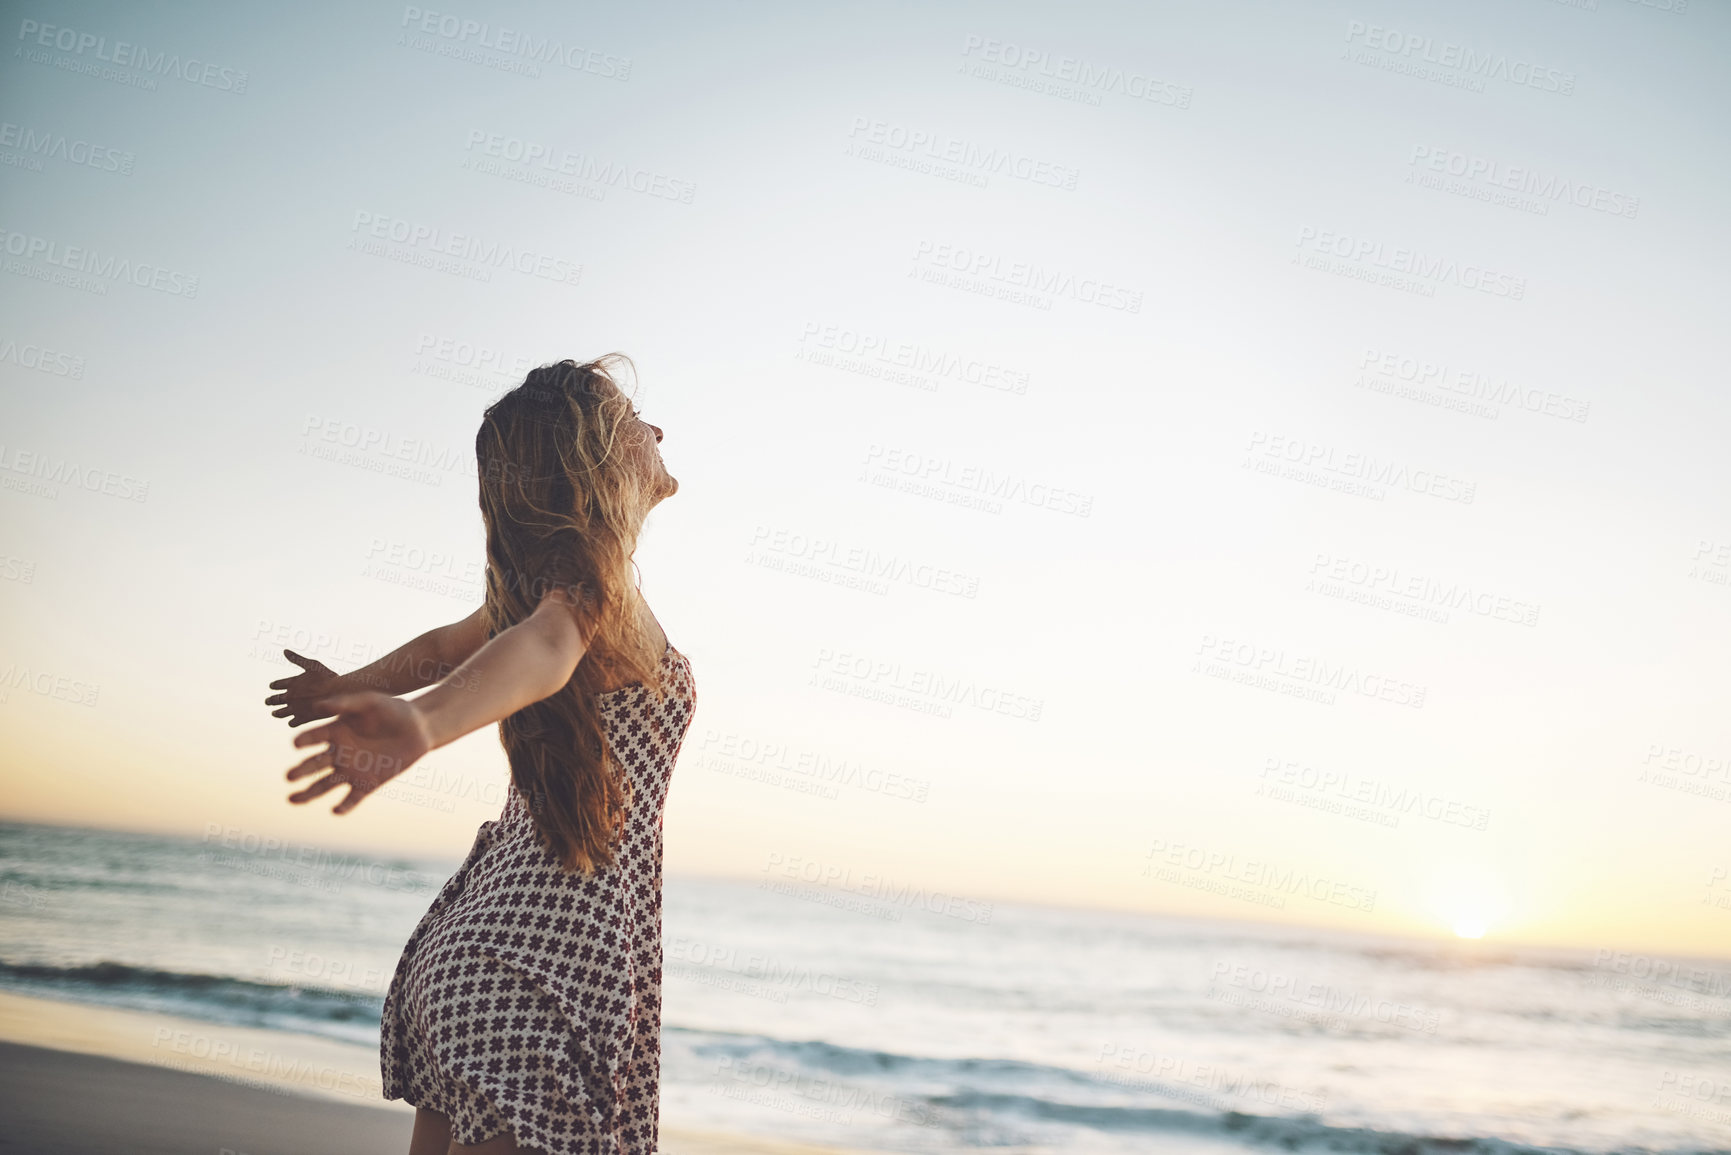 Buy stock photo Shot of a woman standing with her arms outstretched on the beach